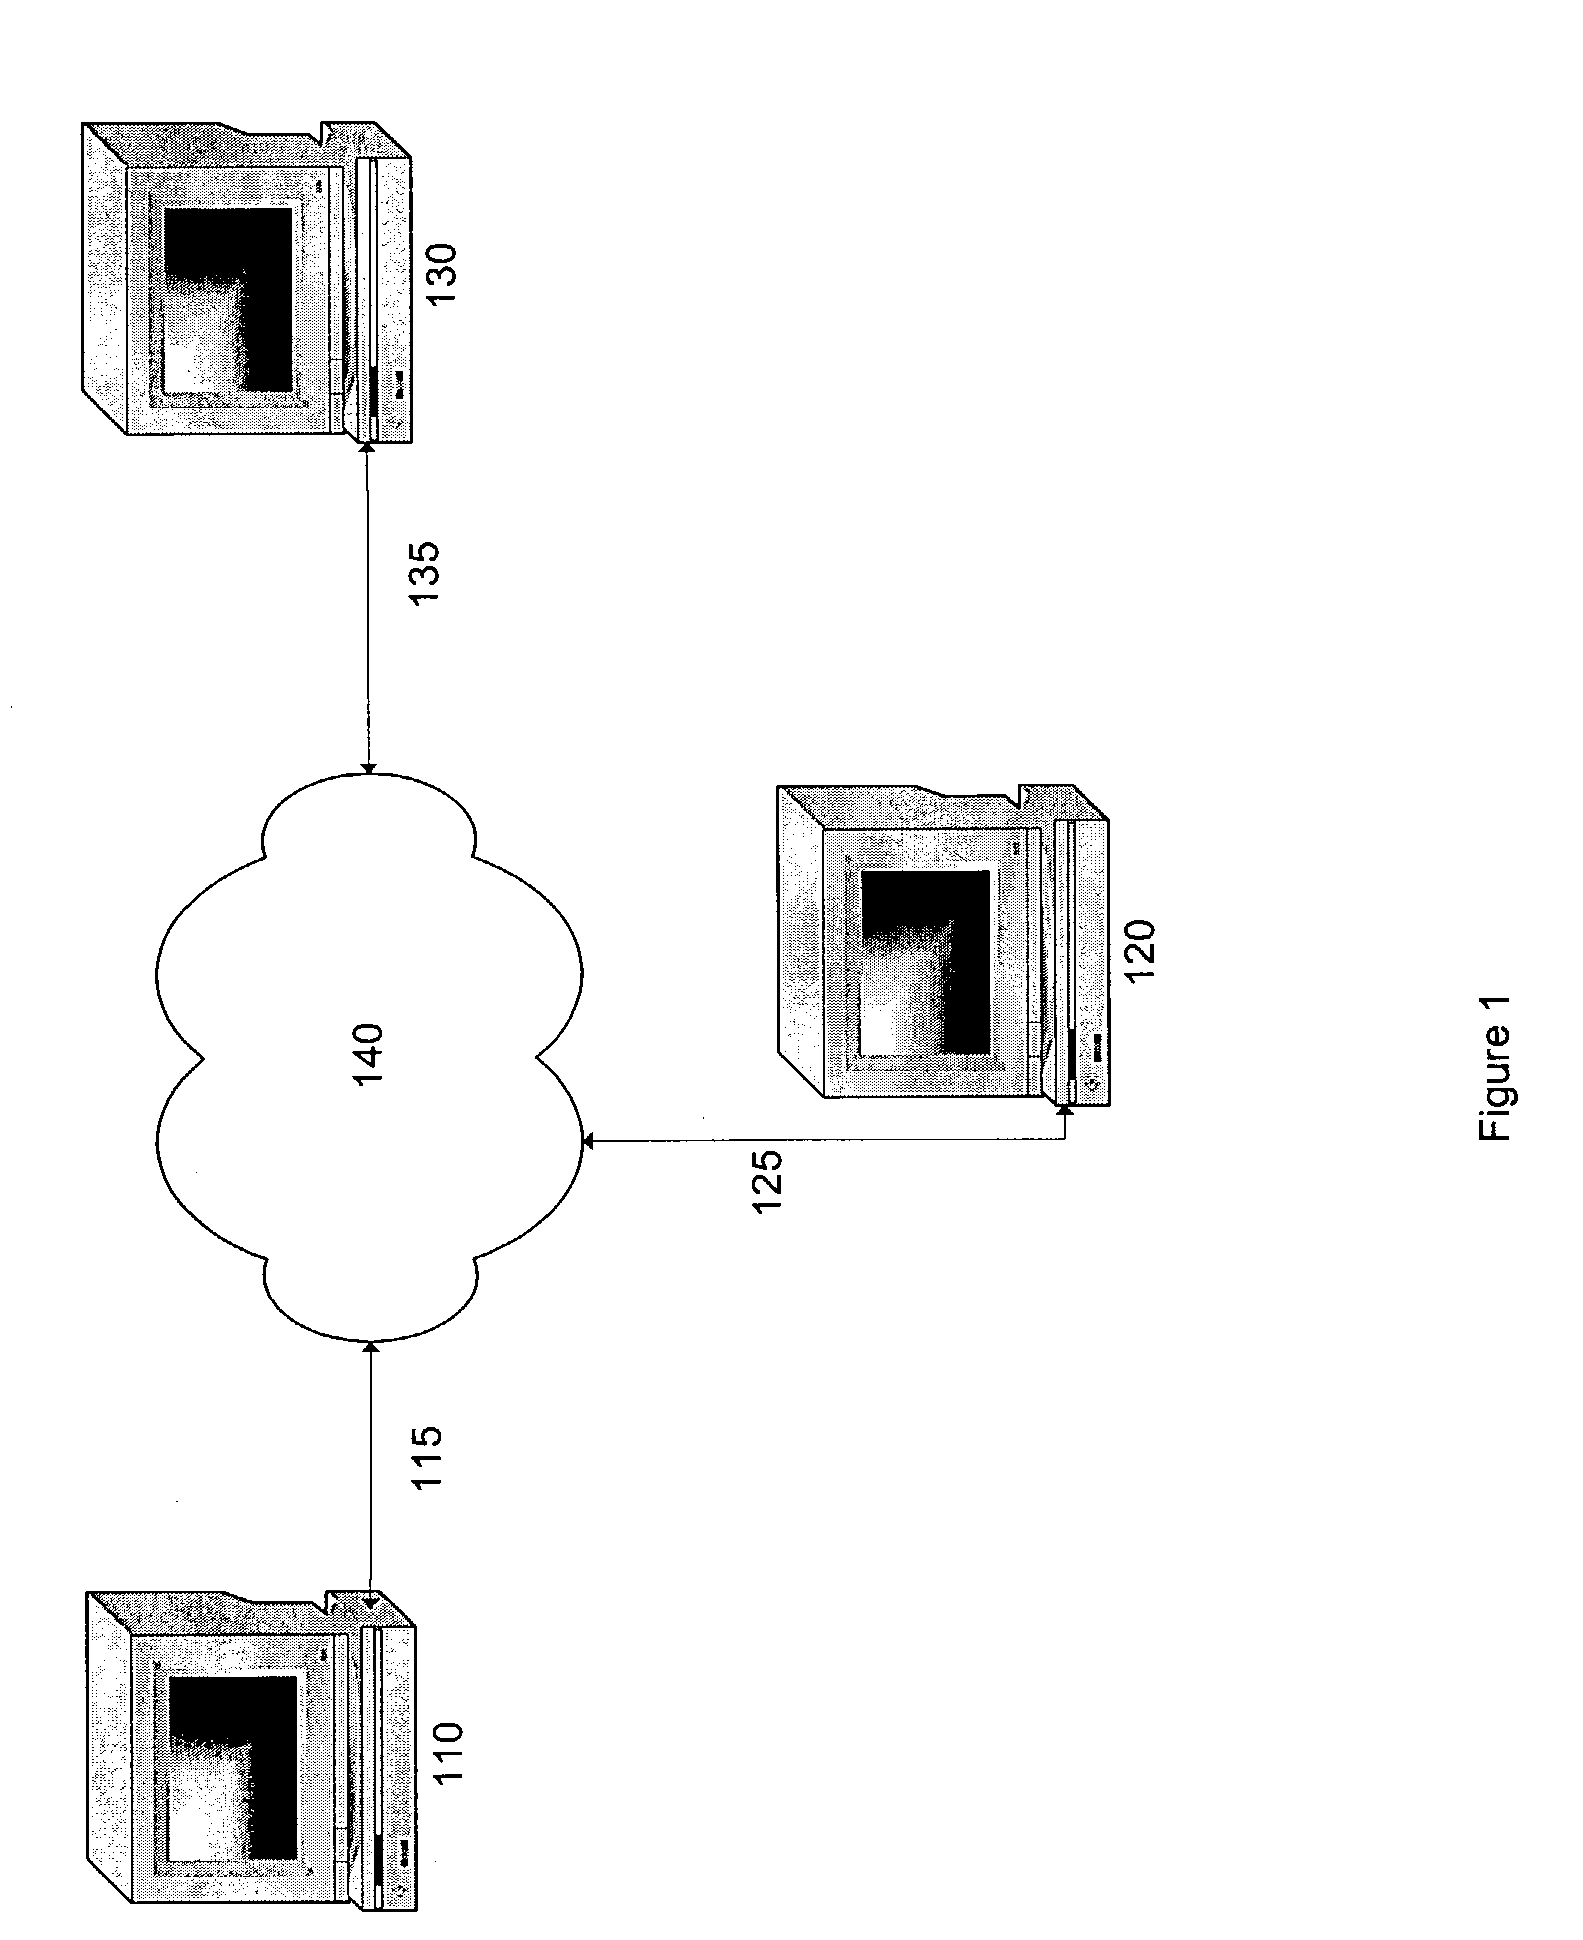 System and method of executing and controlling workflow processes